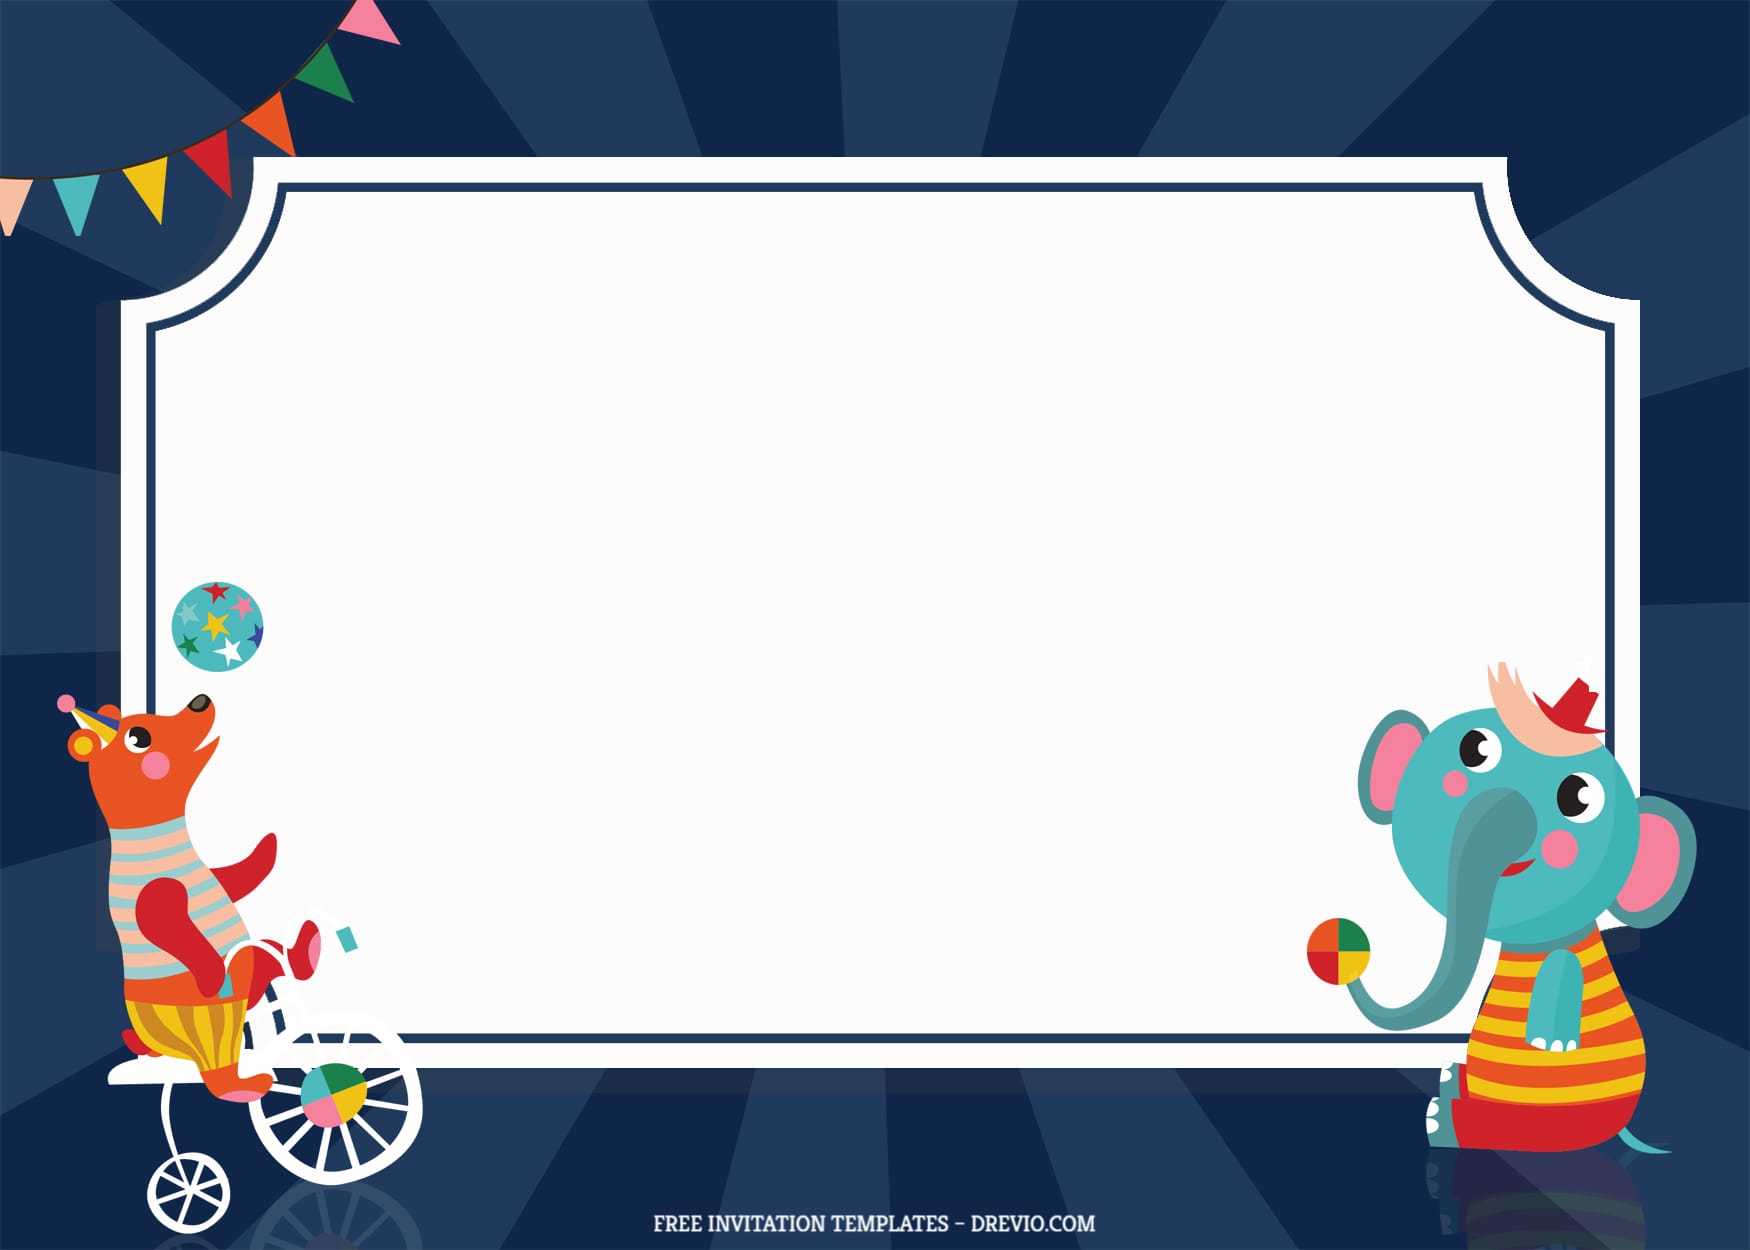 7+ Festive Carnival Party Birthday Invitation Templates With Elephant And BEar One